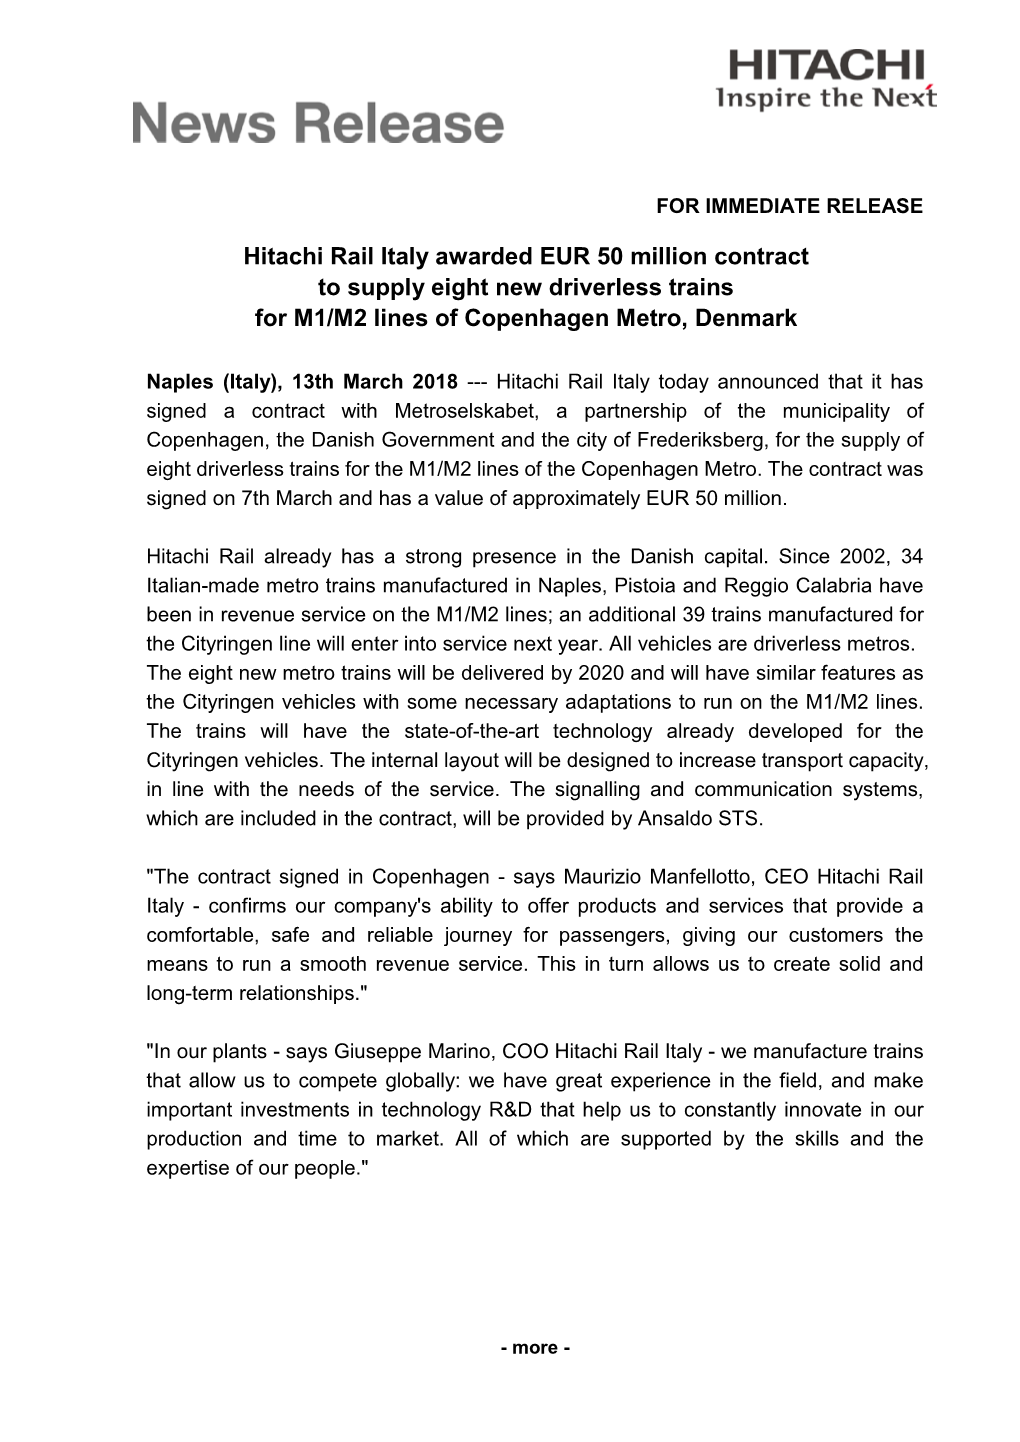 Hitachi Rail Italy Awarded EUR 50 Million Contract to Supply Eight New Driverless Trains for M1/M2 Lines of Copenhagen Metro, Denmark